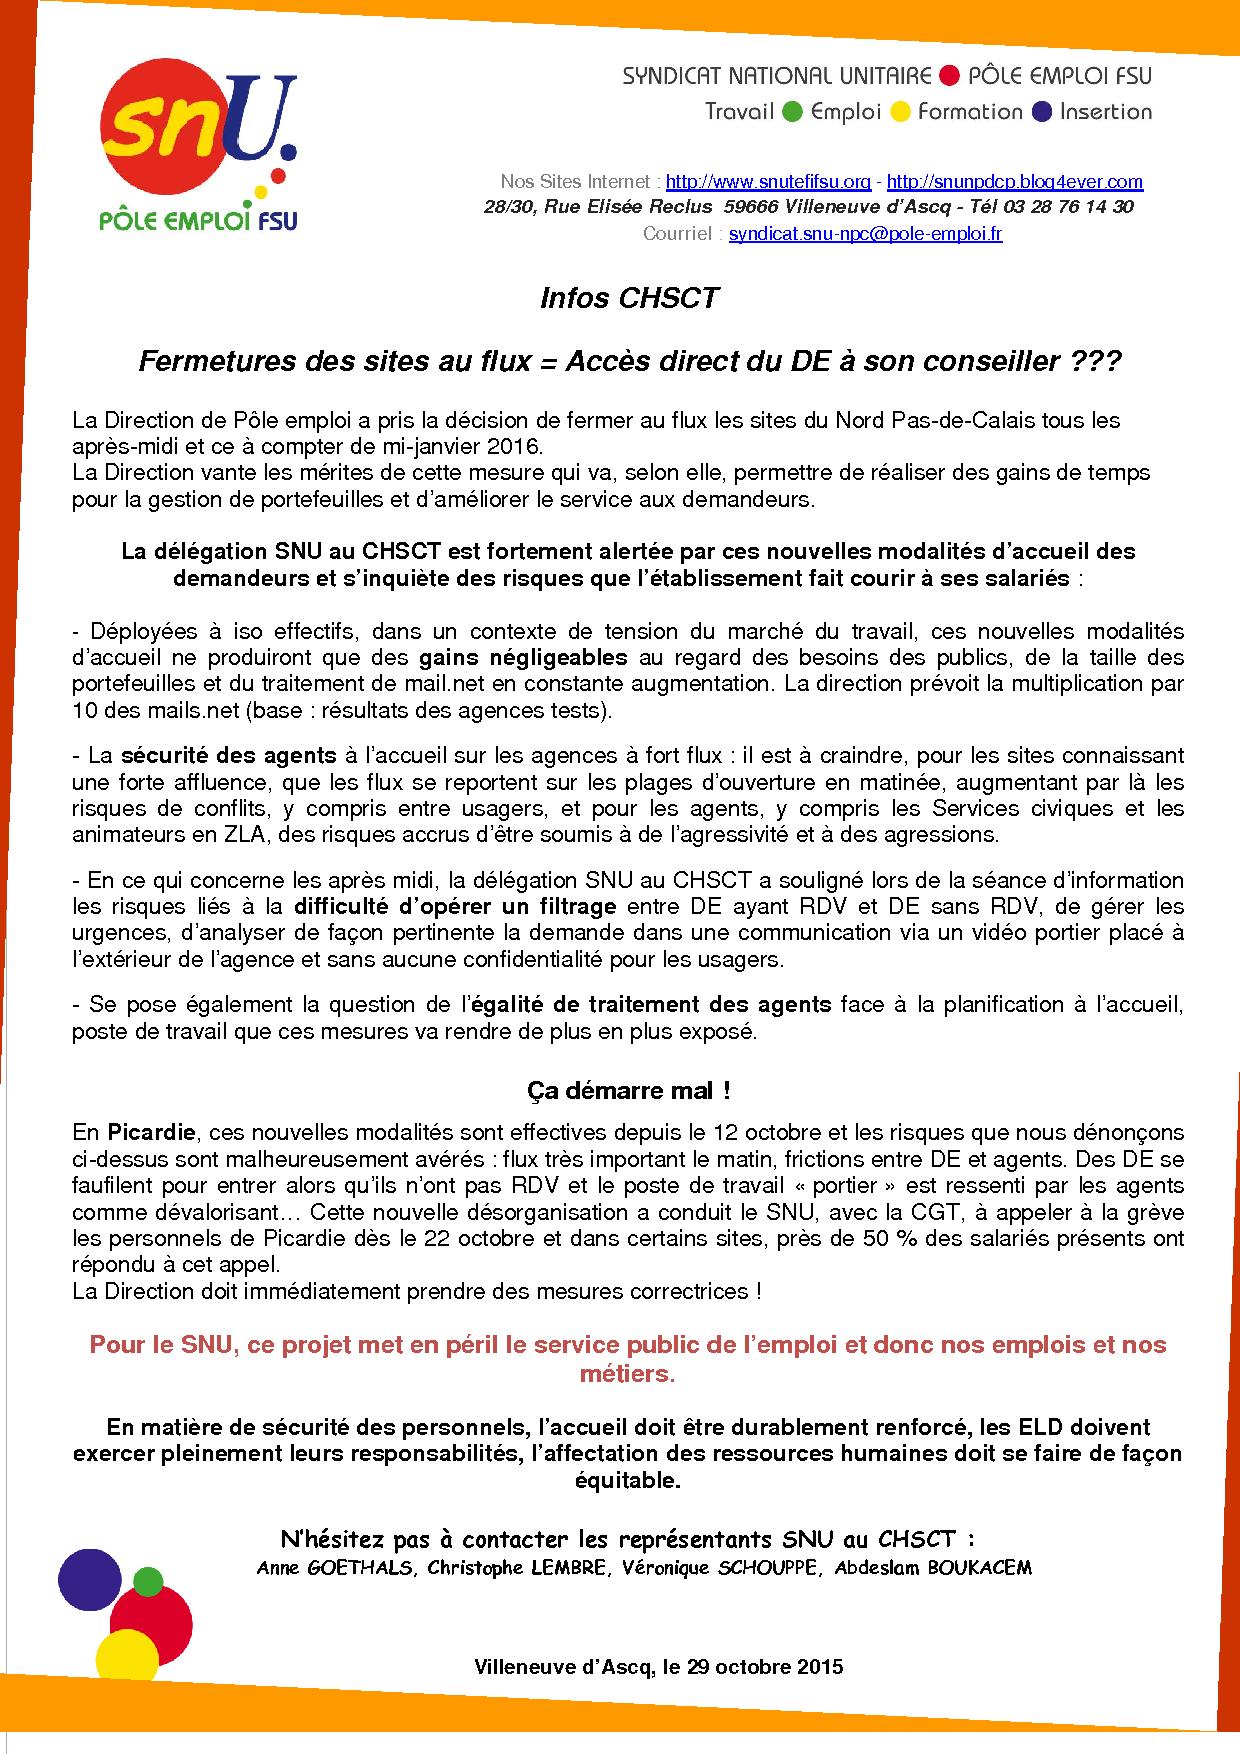 Tract CHSCT Fermetures des sites.jpg